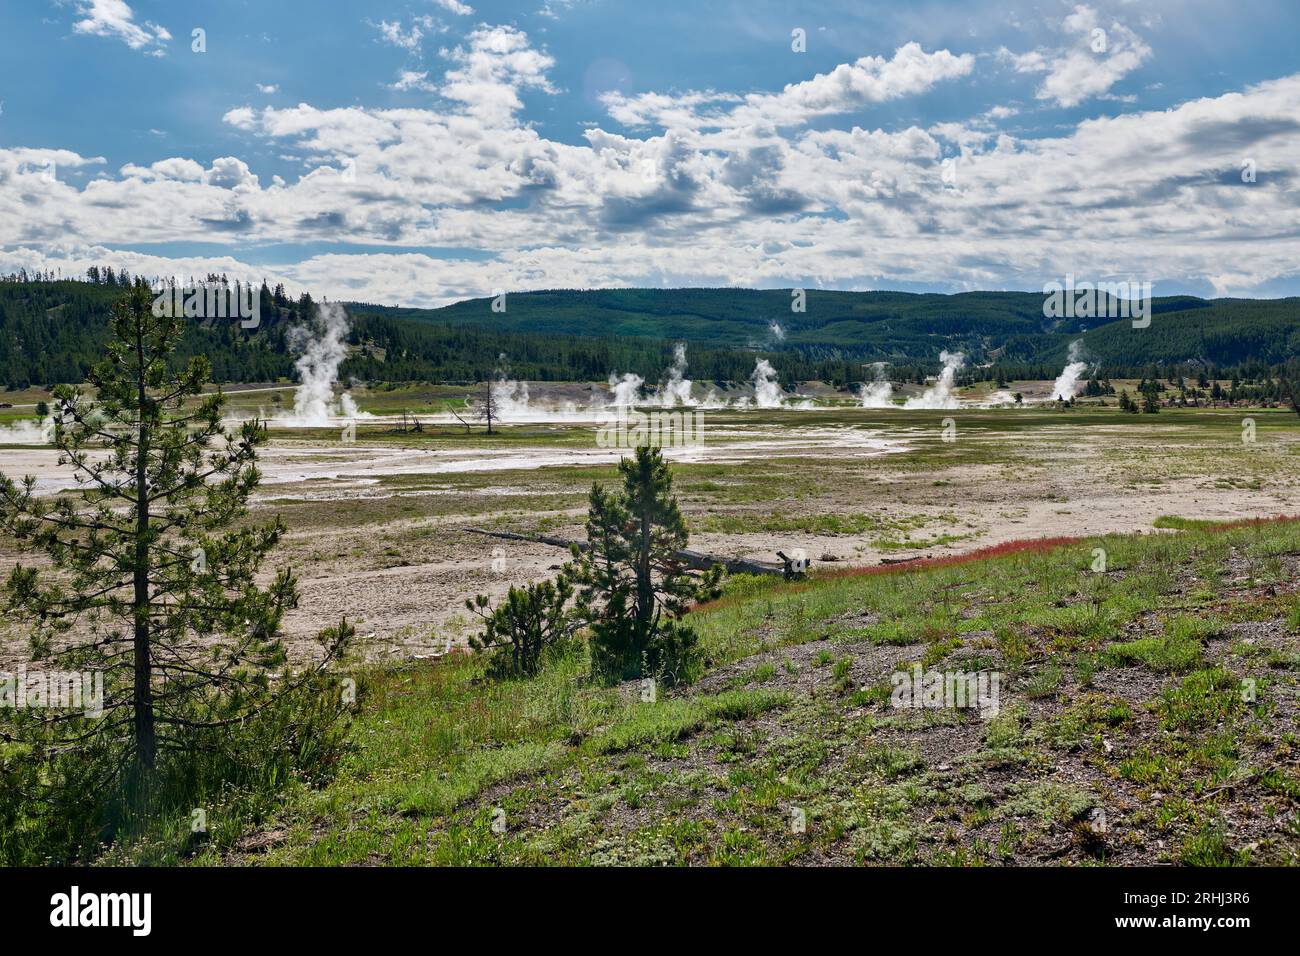 steam over Midway Geyser Basin, Yellowstone National Park, Wyoming, United States of America Stock Photo